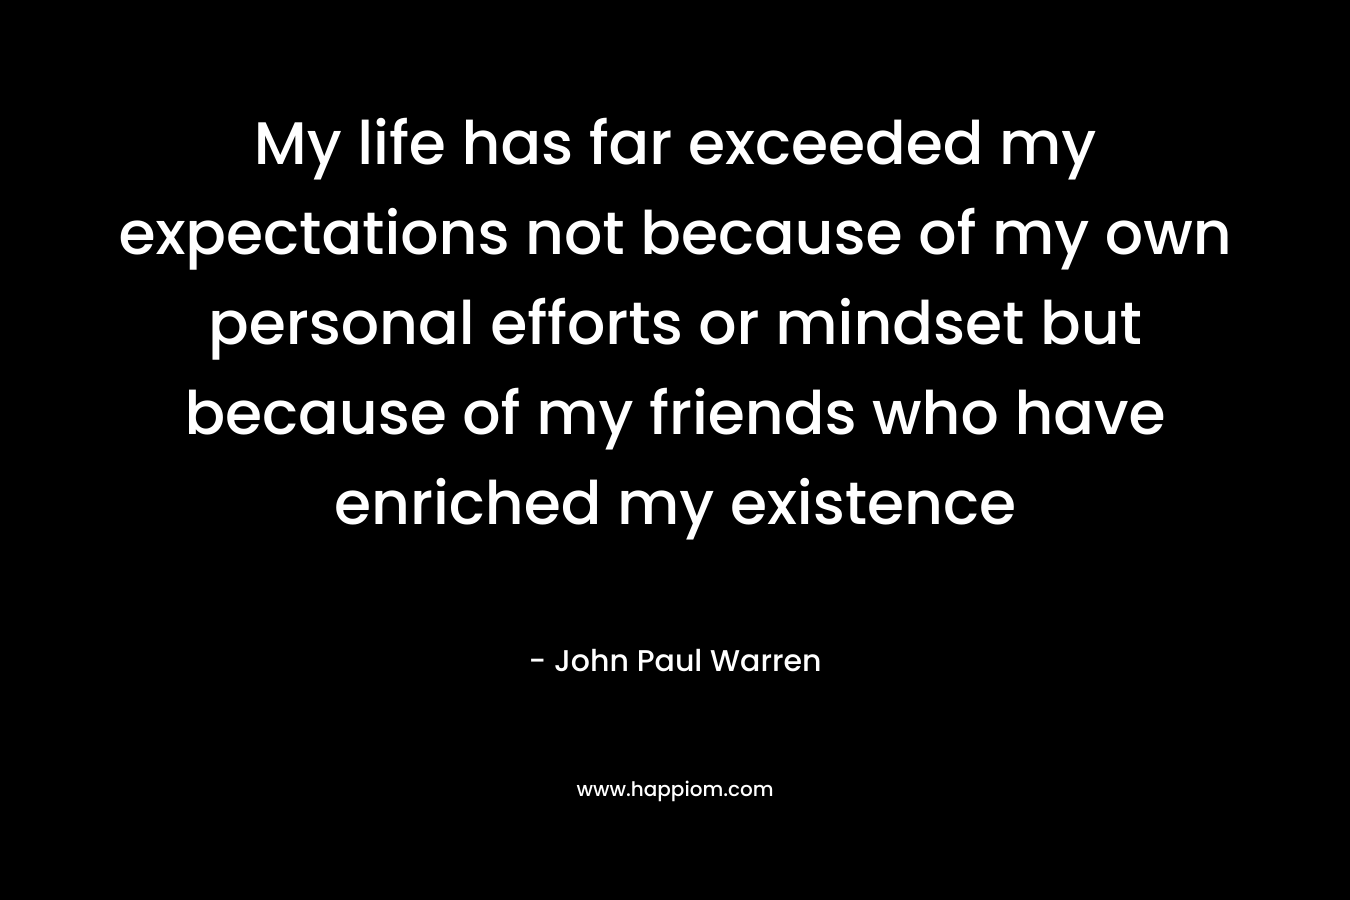 My life has far exceeded my expectations not because of my own personal efforts or mindset but because of my friends who have enriched my existence